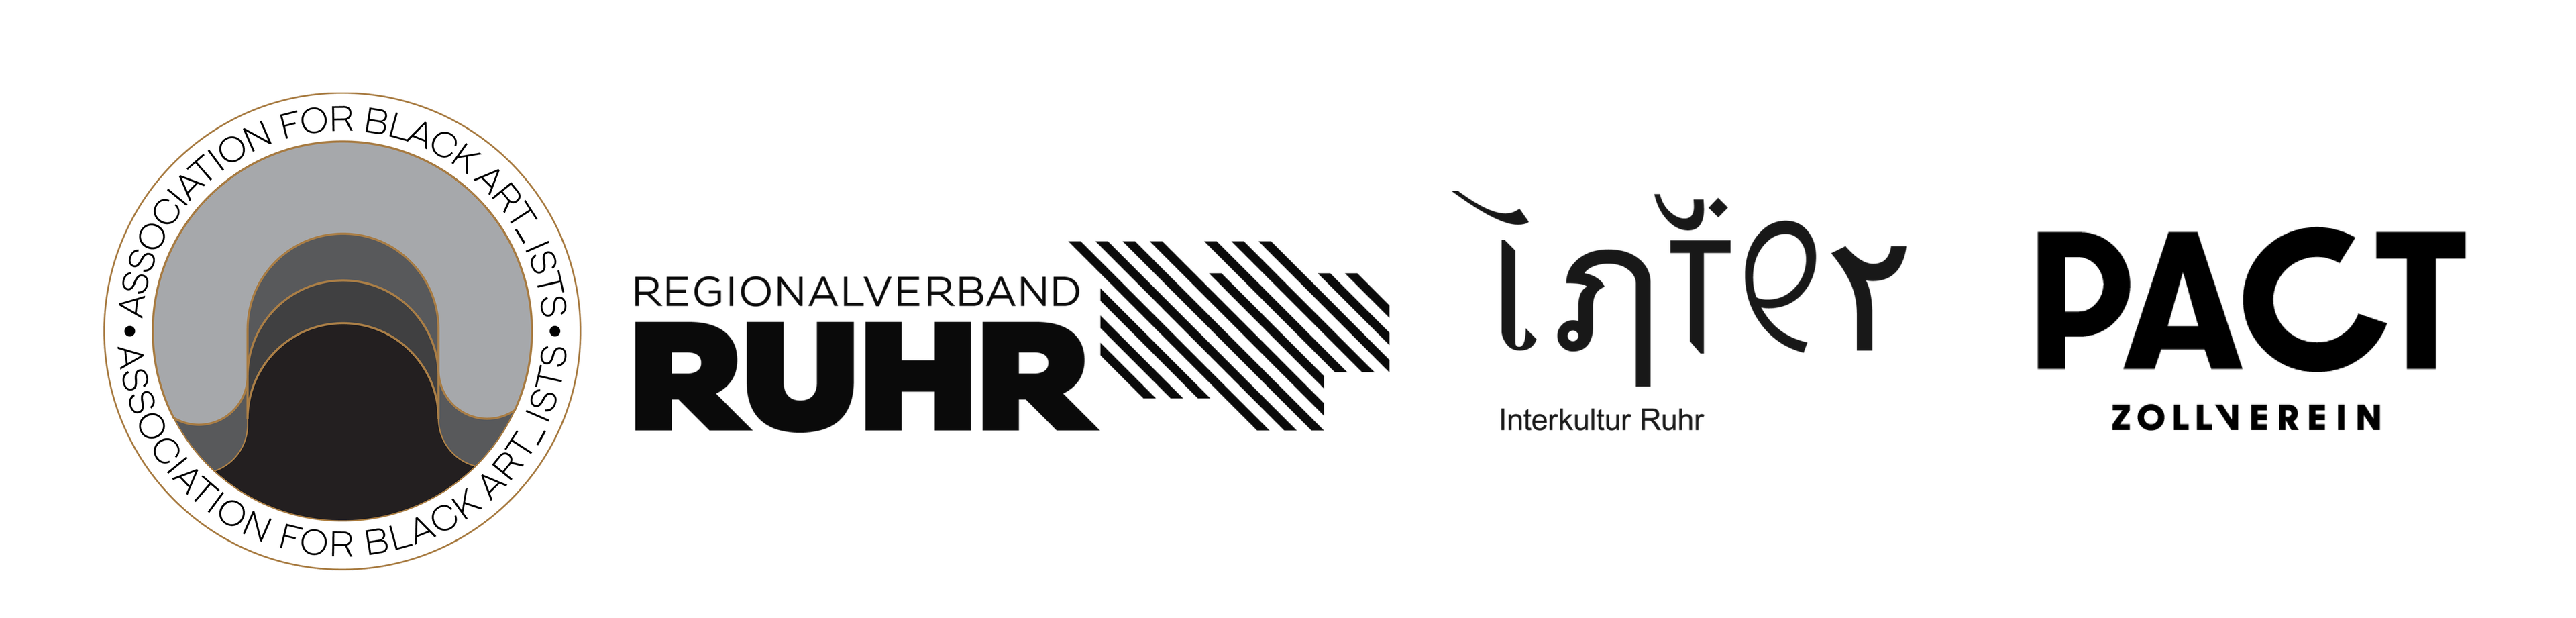 Logos of the supporters of the project: Regionalverband Ruhr, Interkultur Ruhr, Association for Black Art_ists, PACT